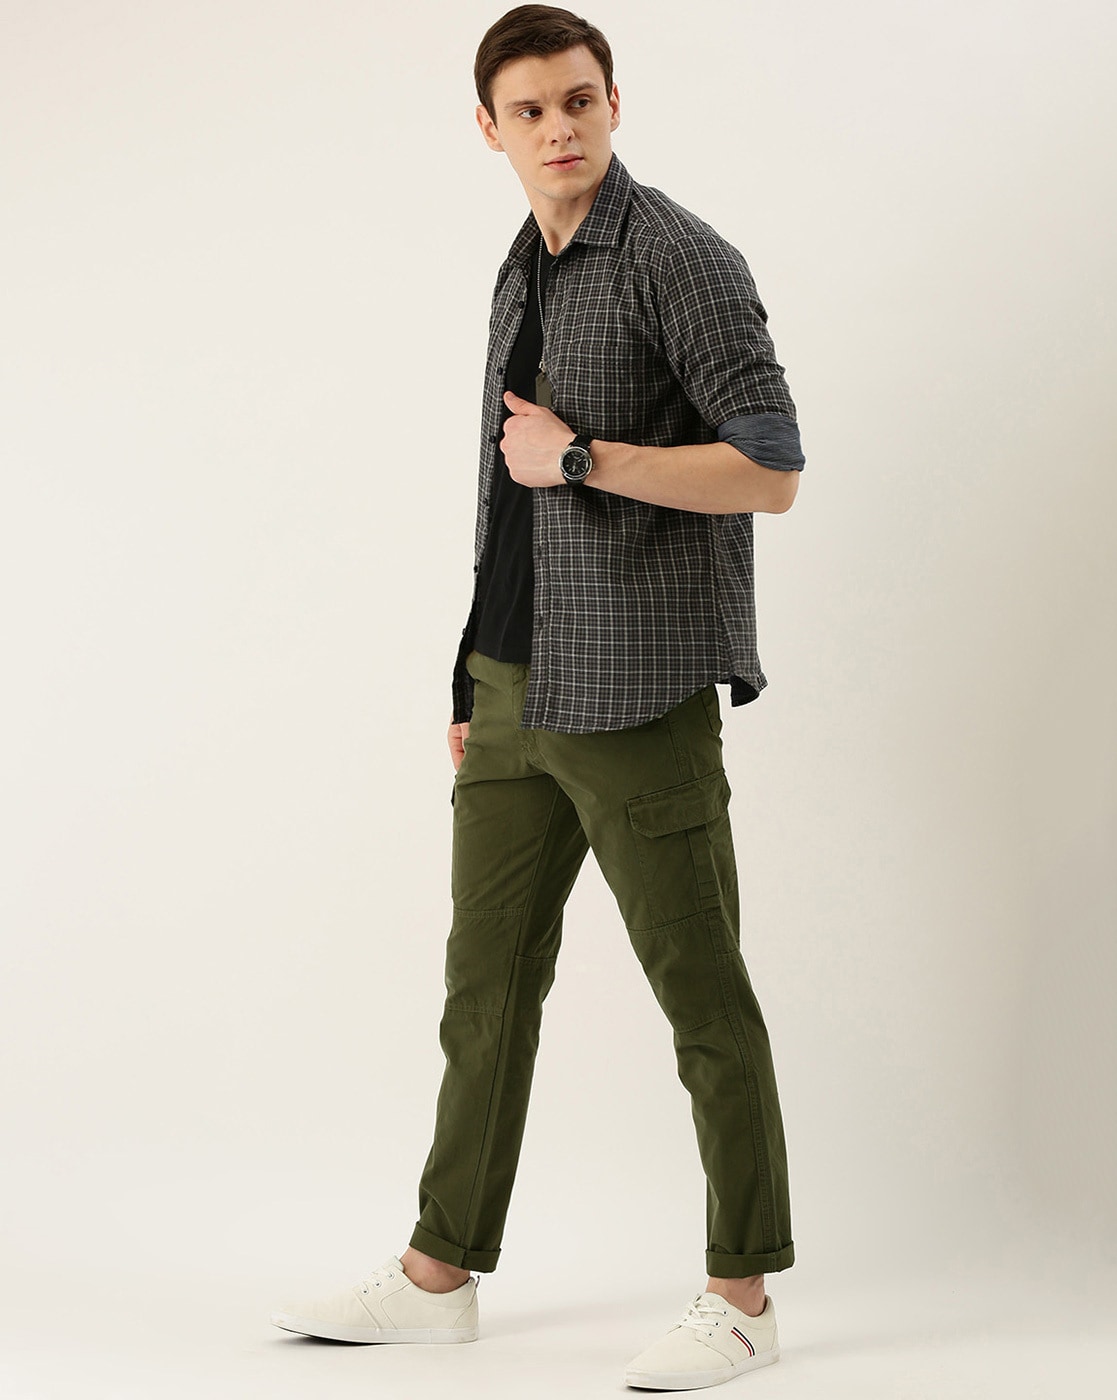 How To Wear Cargo Pants: 14 Stylish Outfits For Modern Men